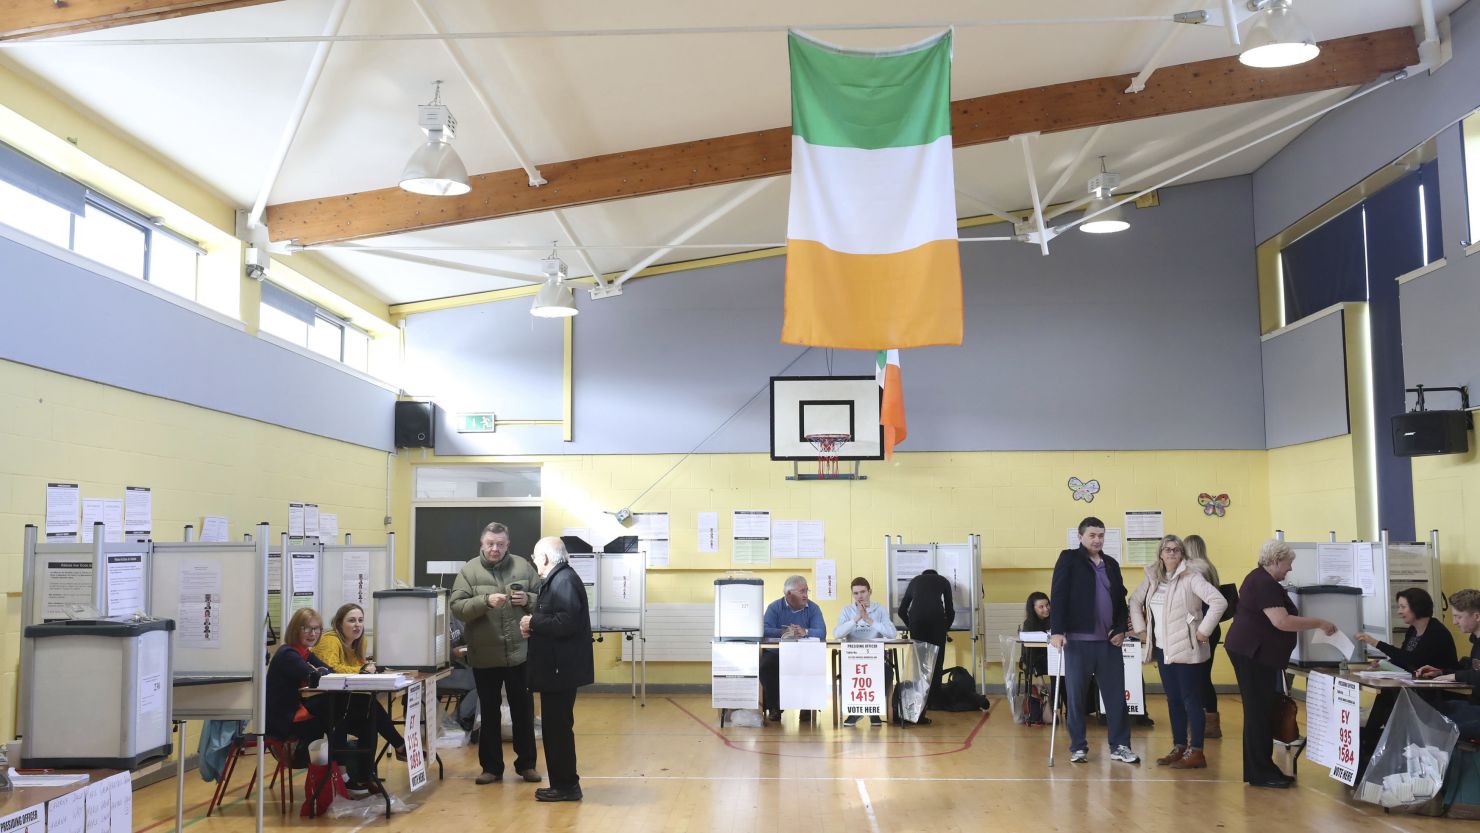 Voters cast their ballots Friday in the Irish presidential election and referendum in Castleknock in Dublin.